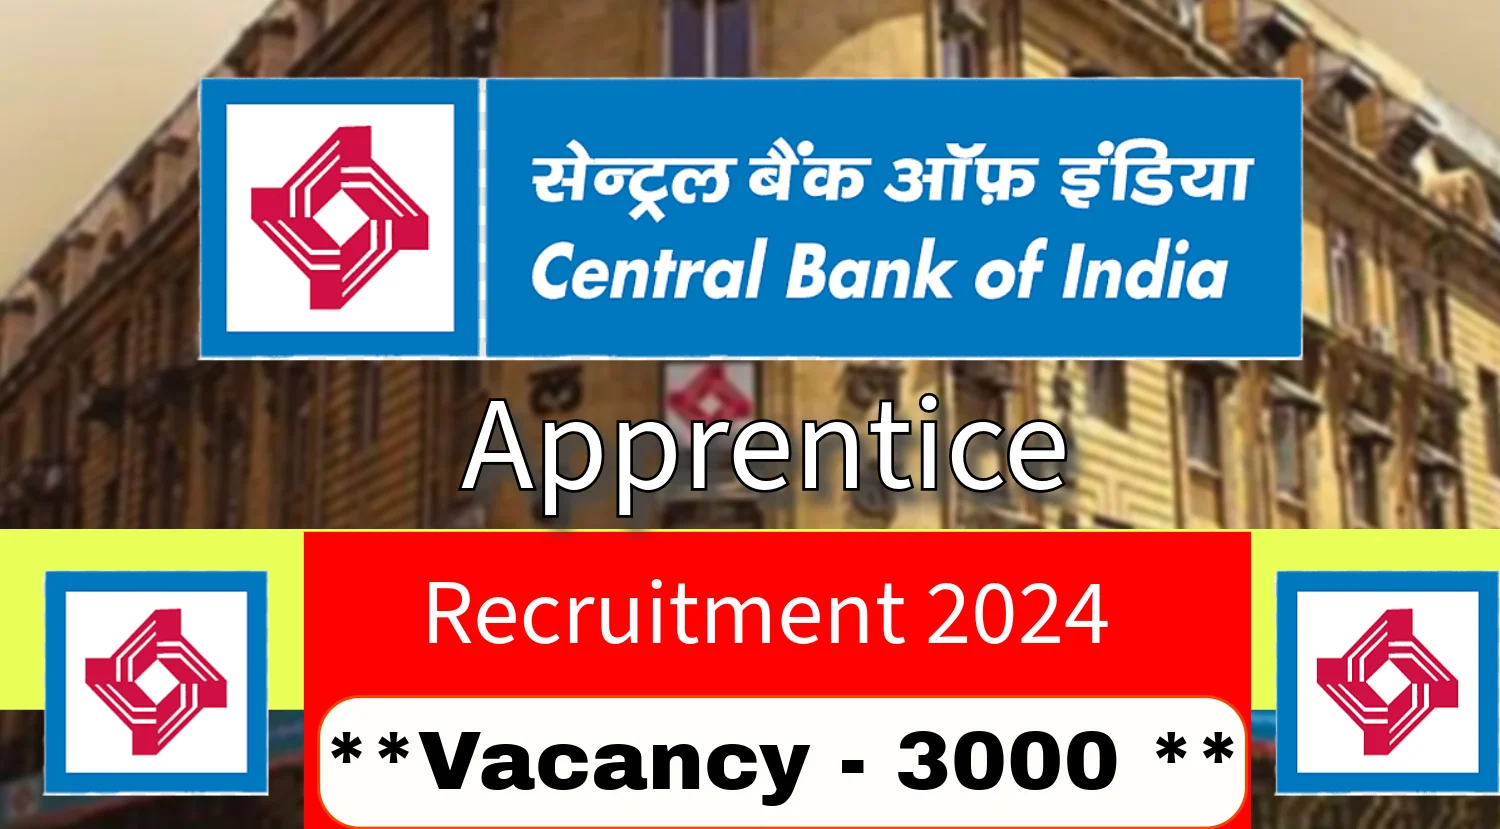 Central Bank of India Apprentice Recruitment 2024 Notification Out for 3000 Vacancies, Check CBI Eligibility Details Now